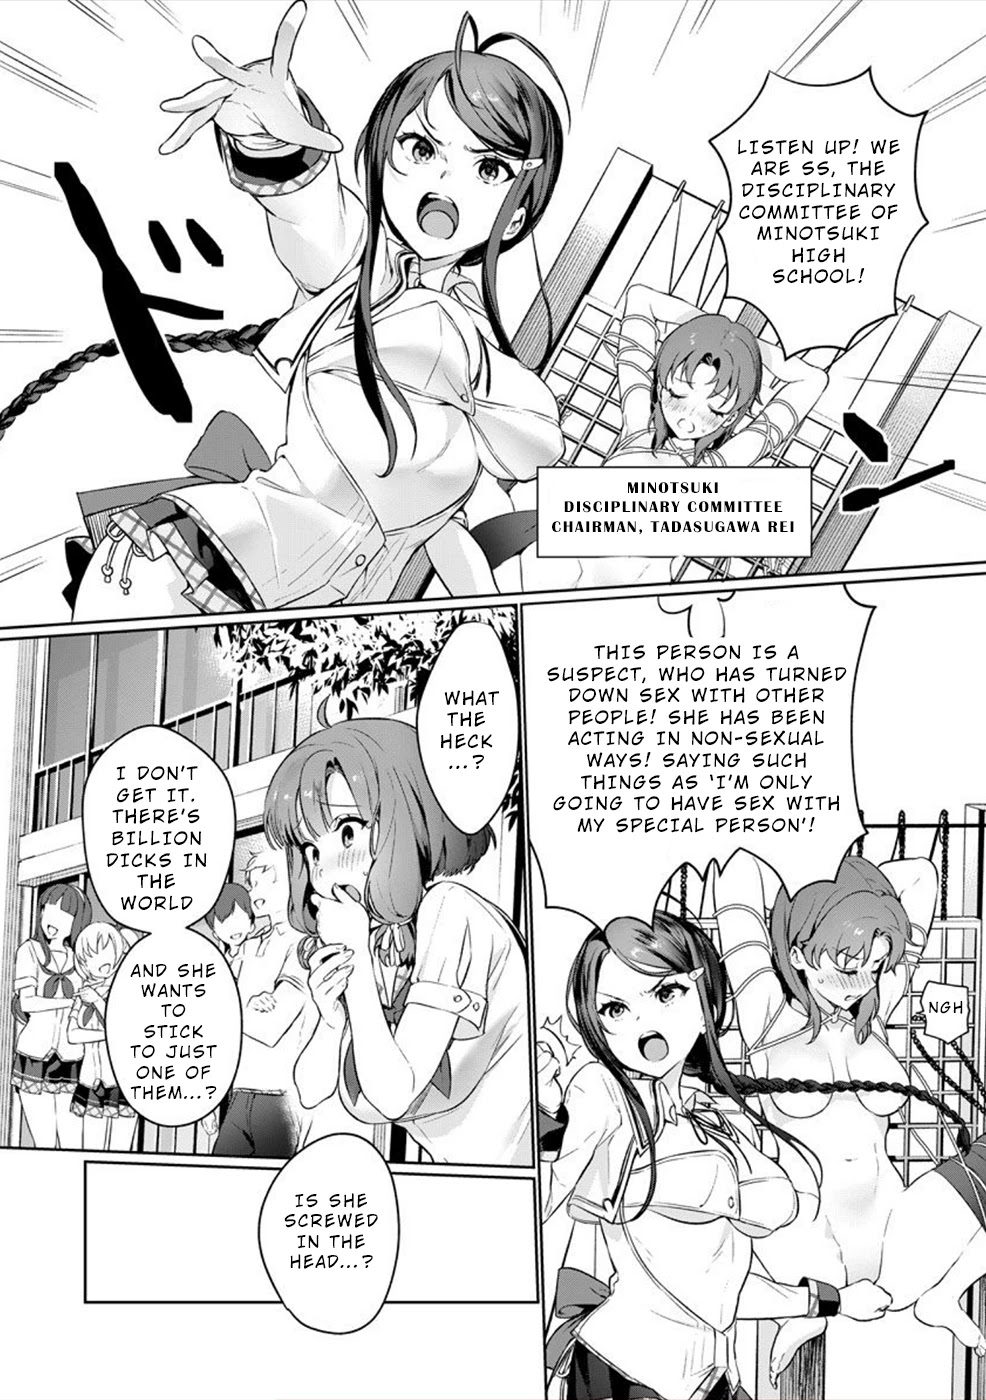 Nukita L - I Live On An Island Straight From A Fap Game, What On Earth Should I Do? Chapter 1 #32